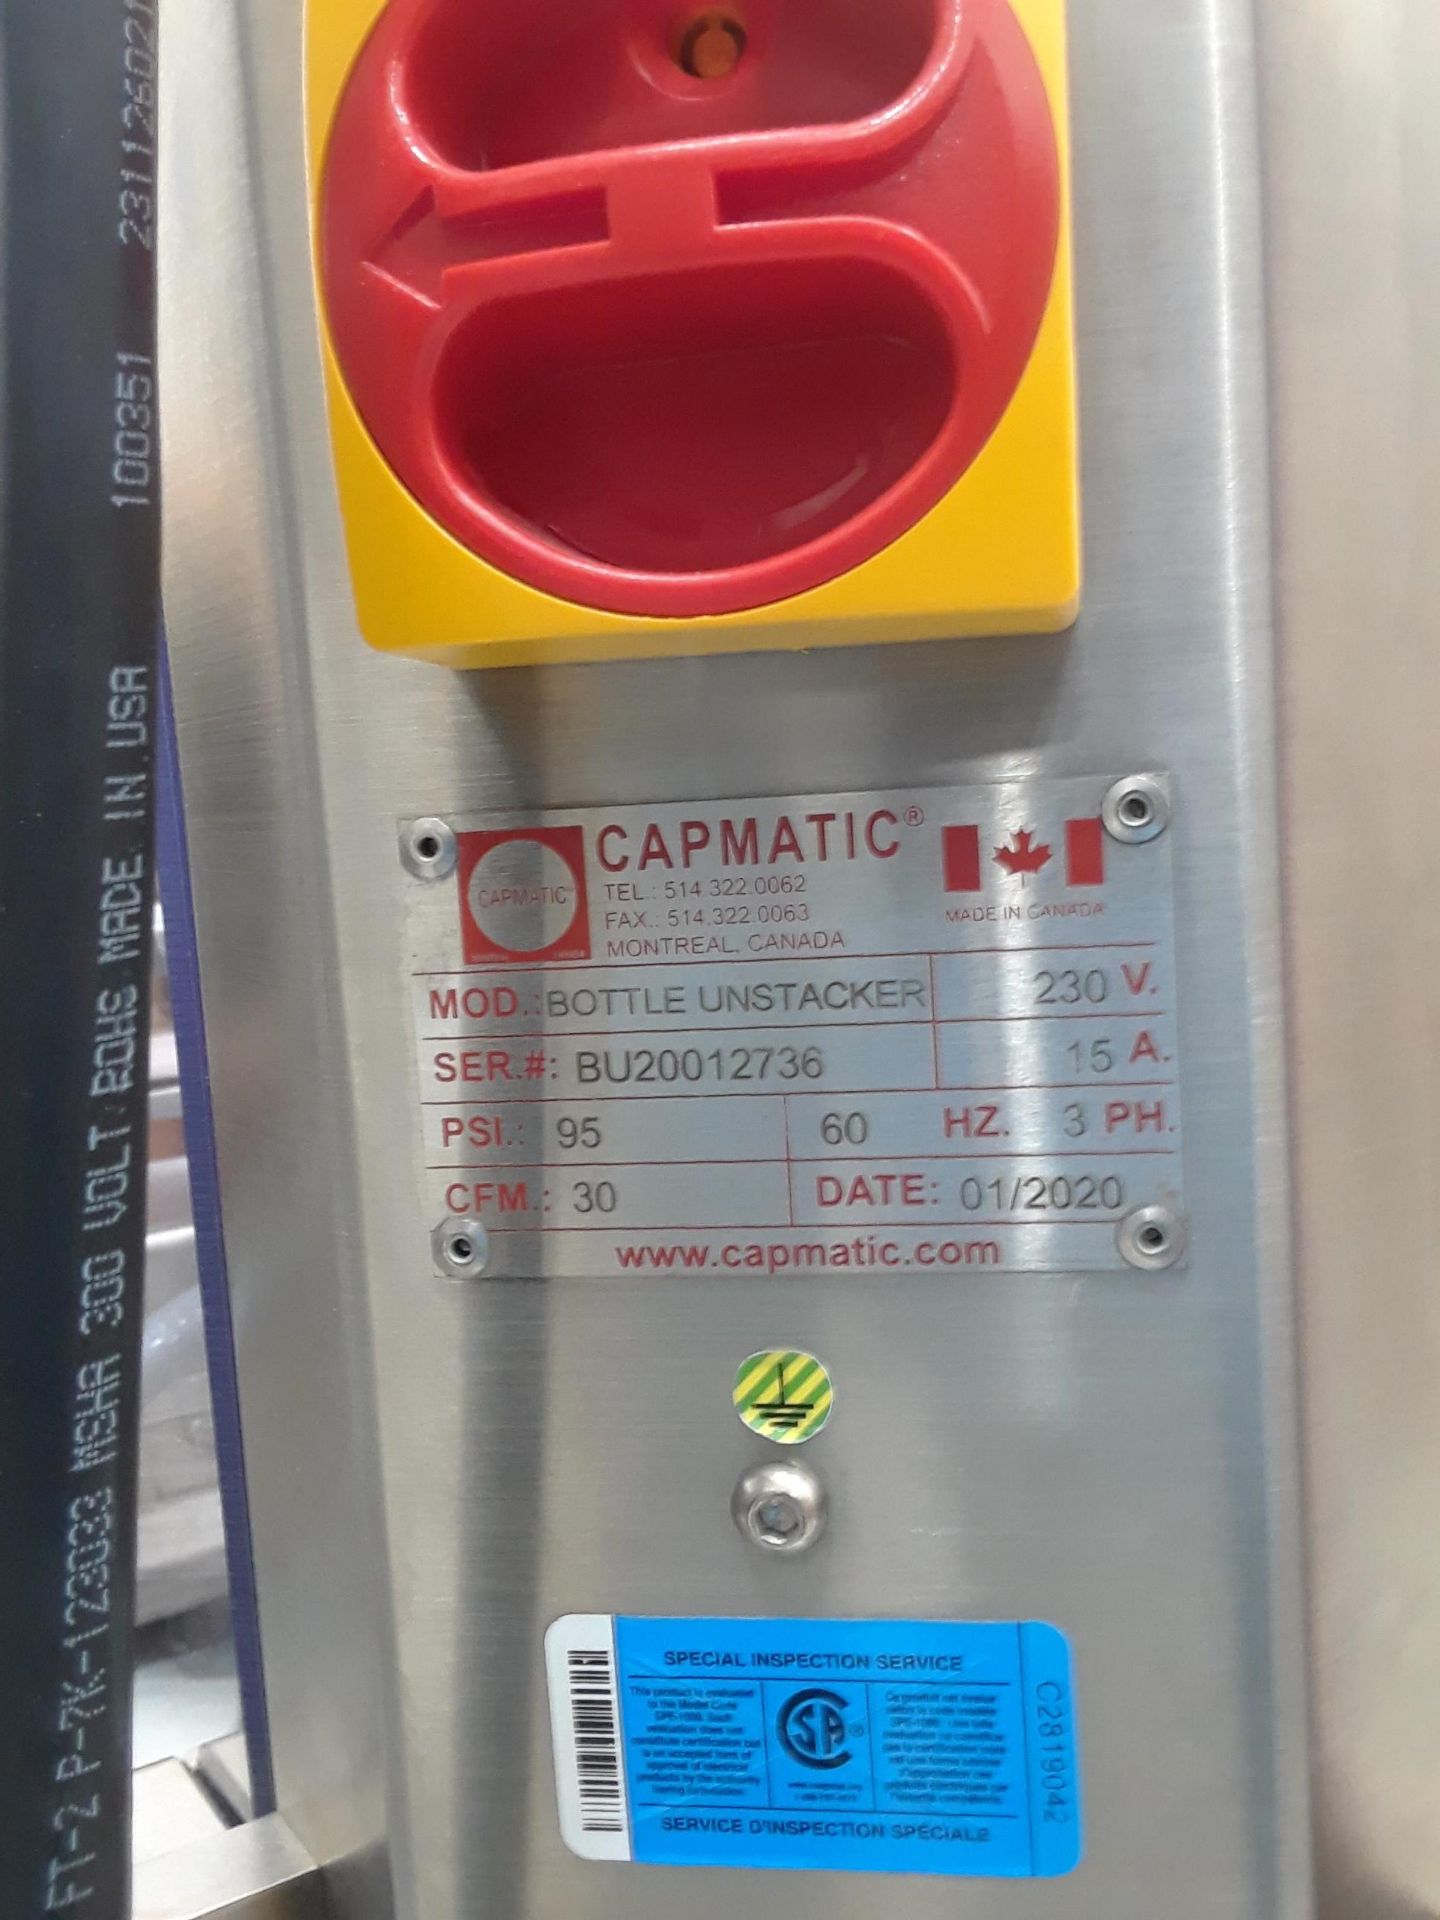 (Located in Acheson, AB, CA) Capmatic Bottle Unstacker, Serial# BU20012736 - Image 3 of 3